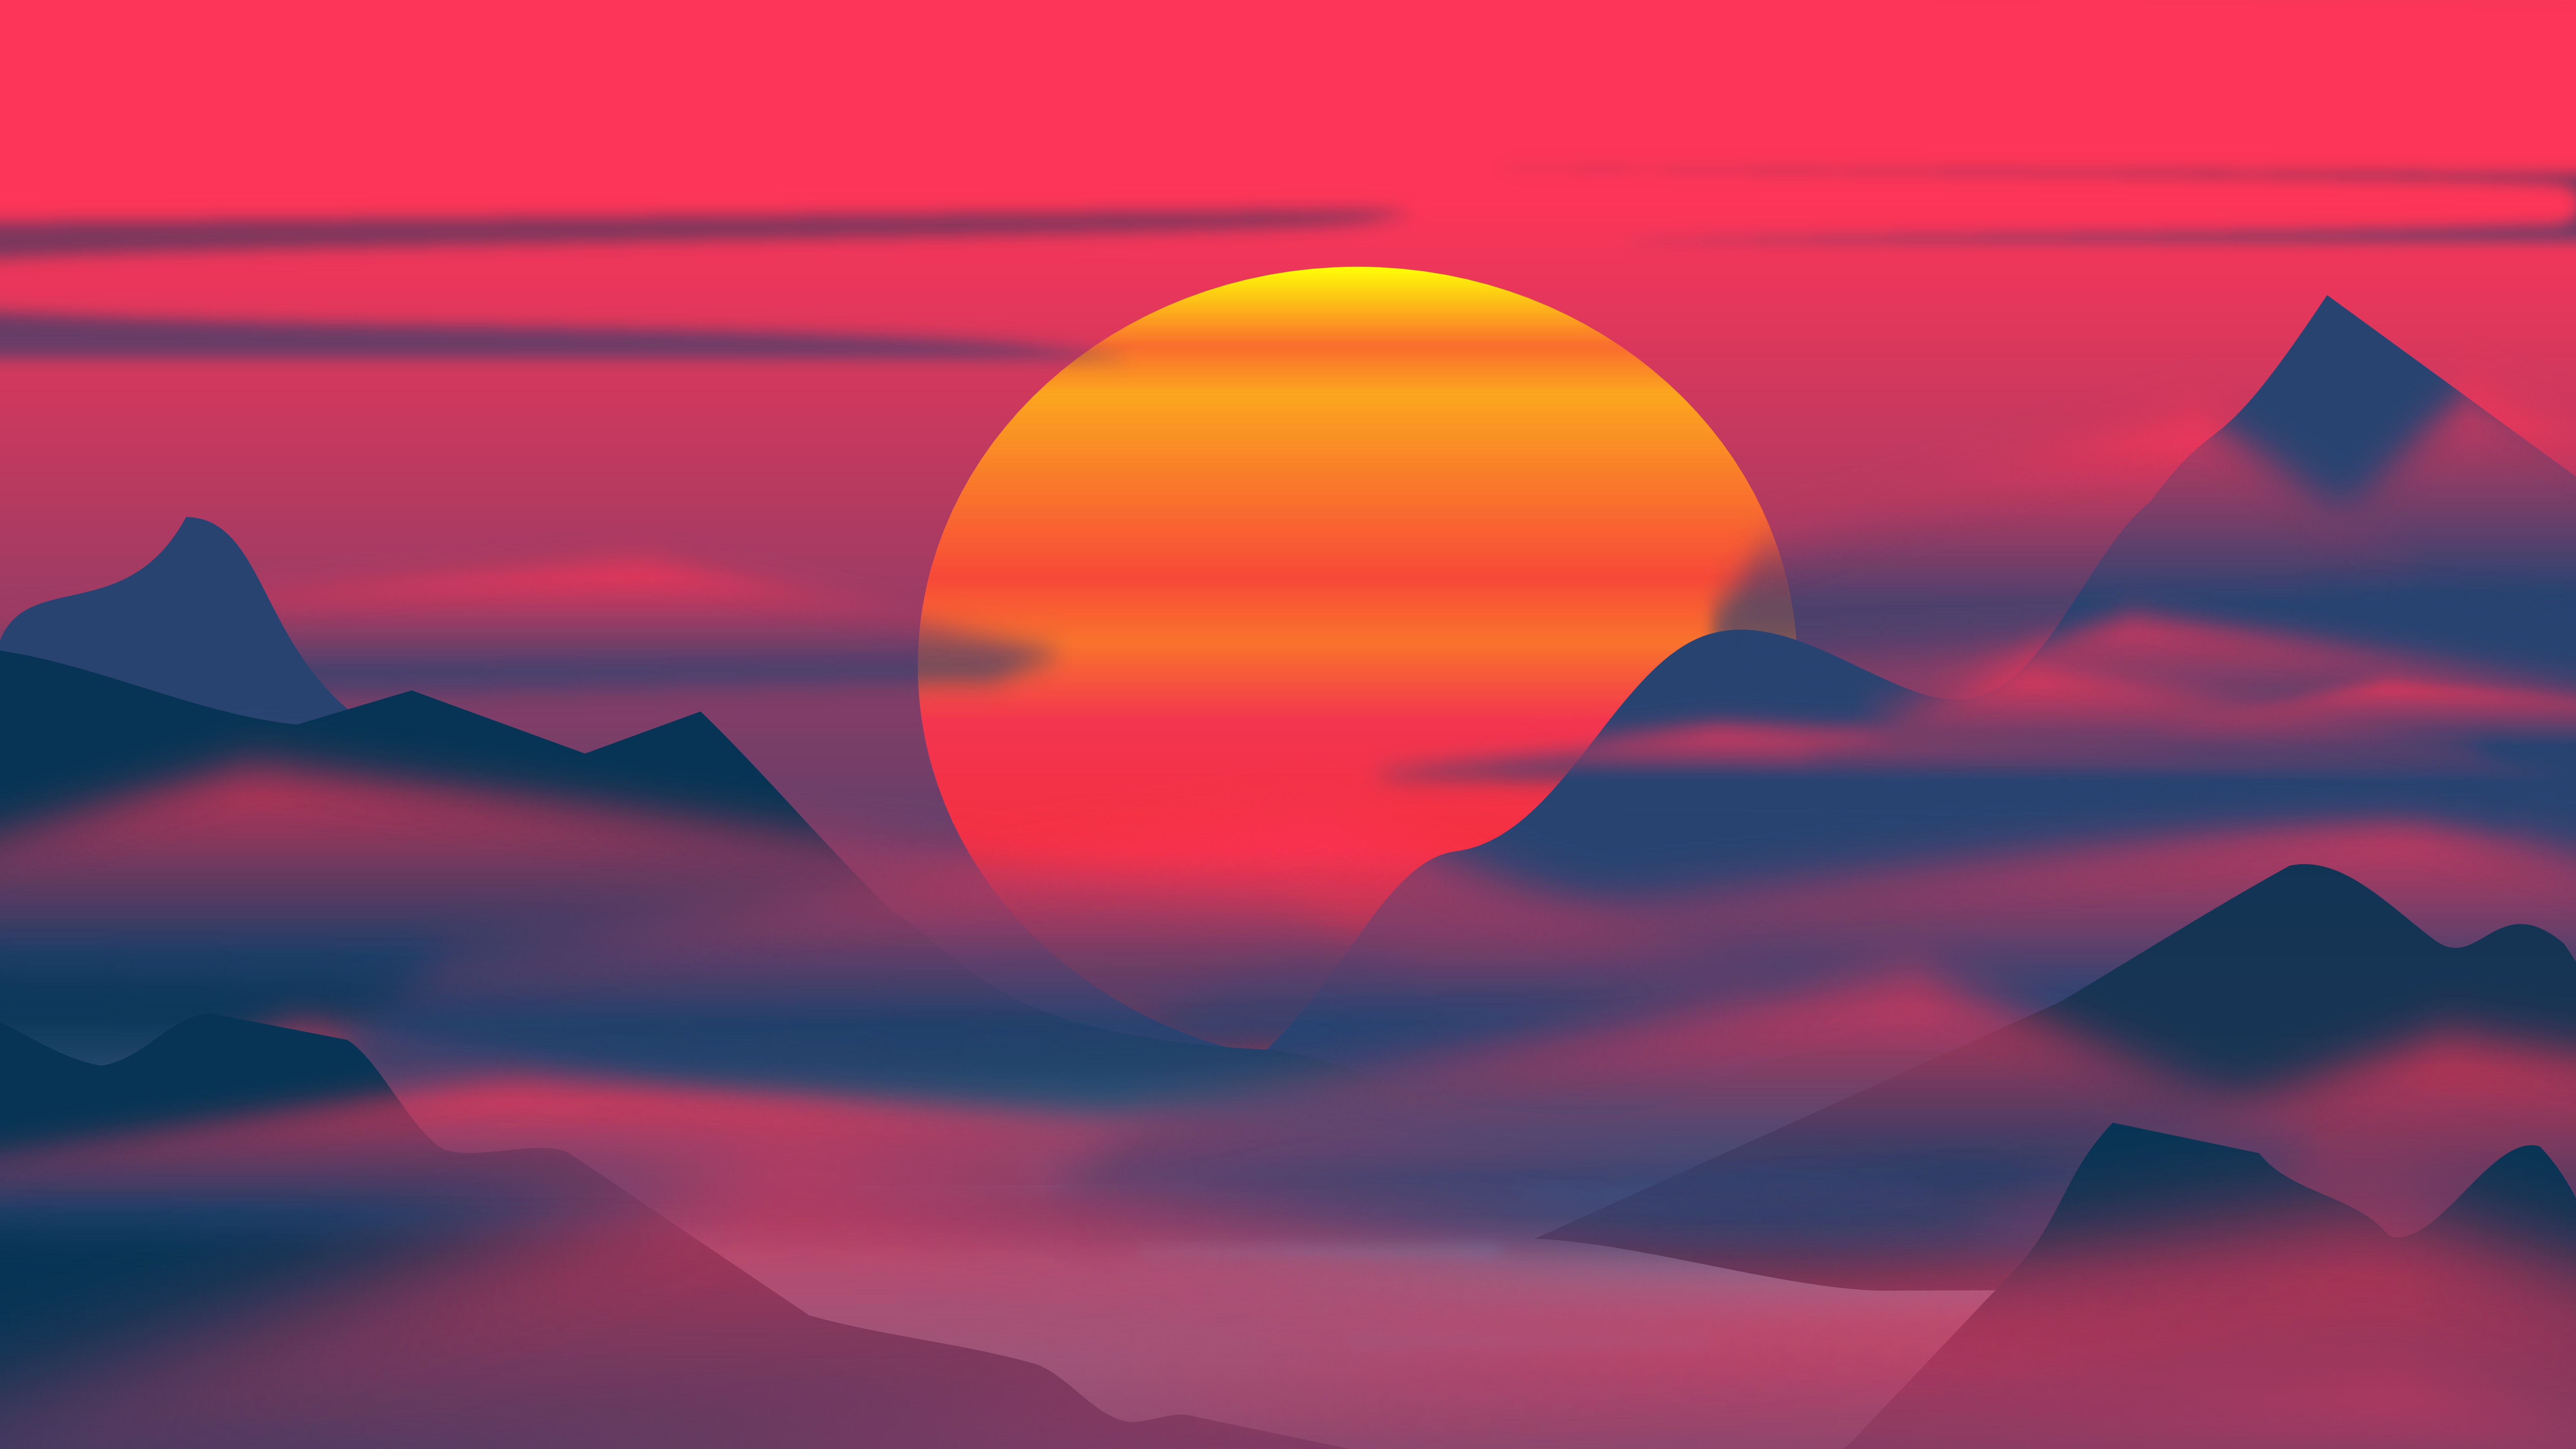 A sunset over the mountains with clouds - Sunrise